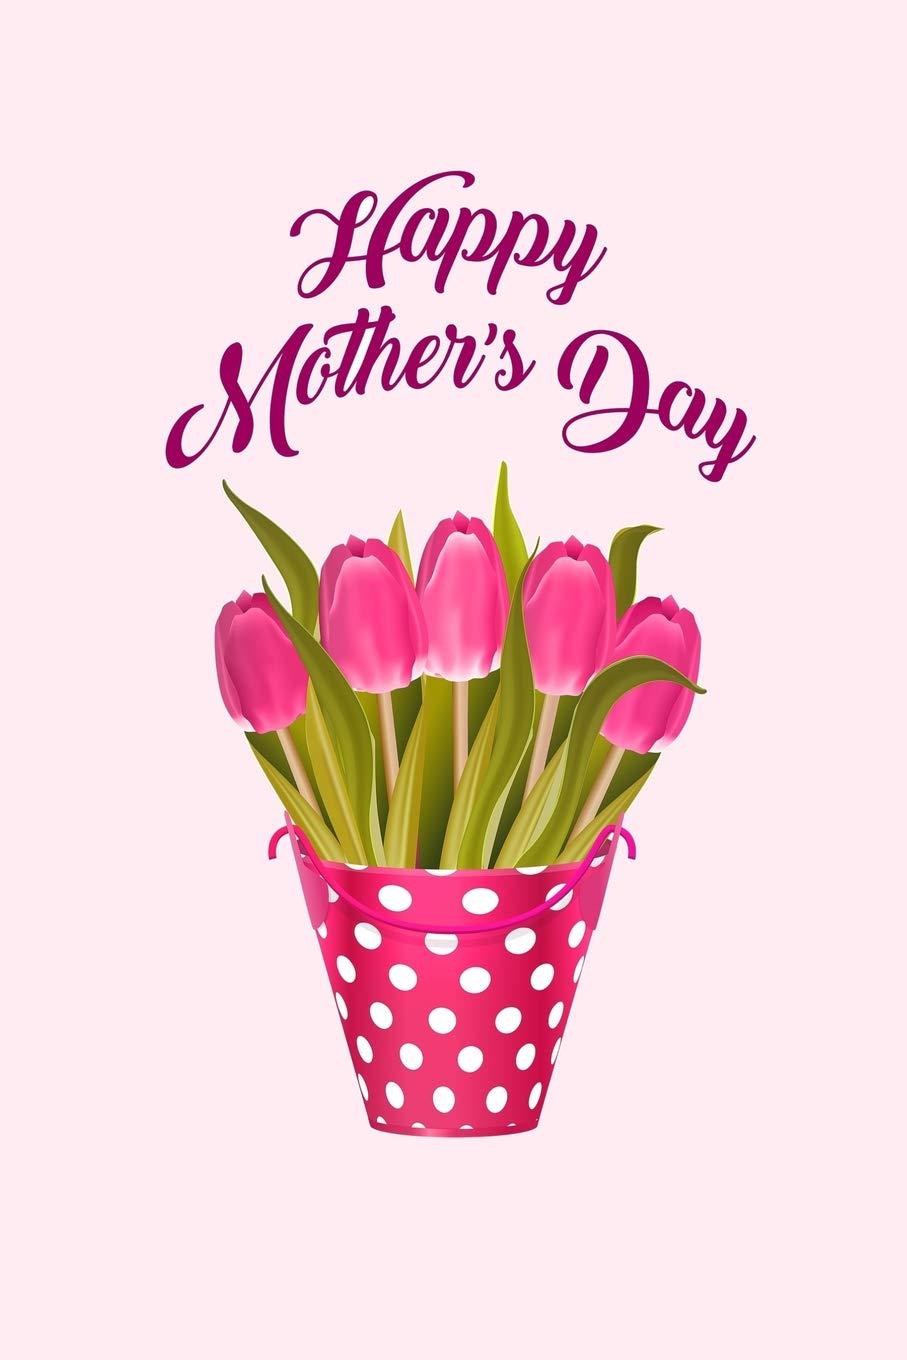 Mothers Day Wallpaper HD Free  Mothers day card template Mothers day  background Mothers day images